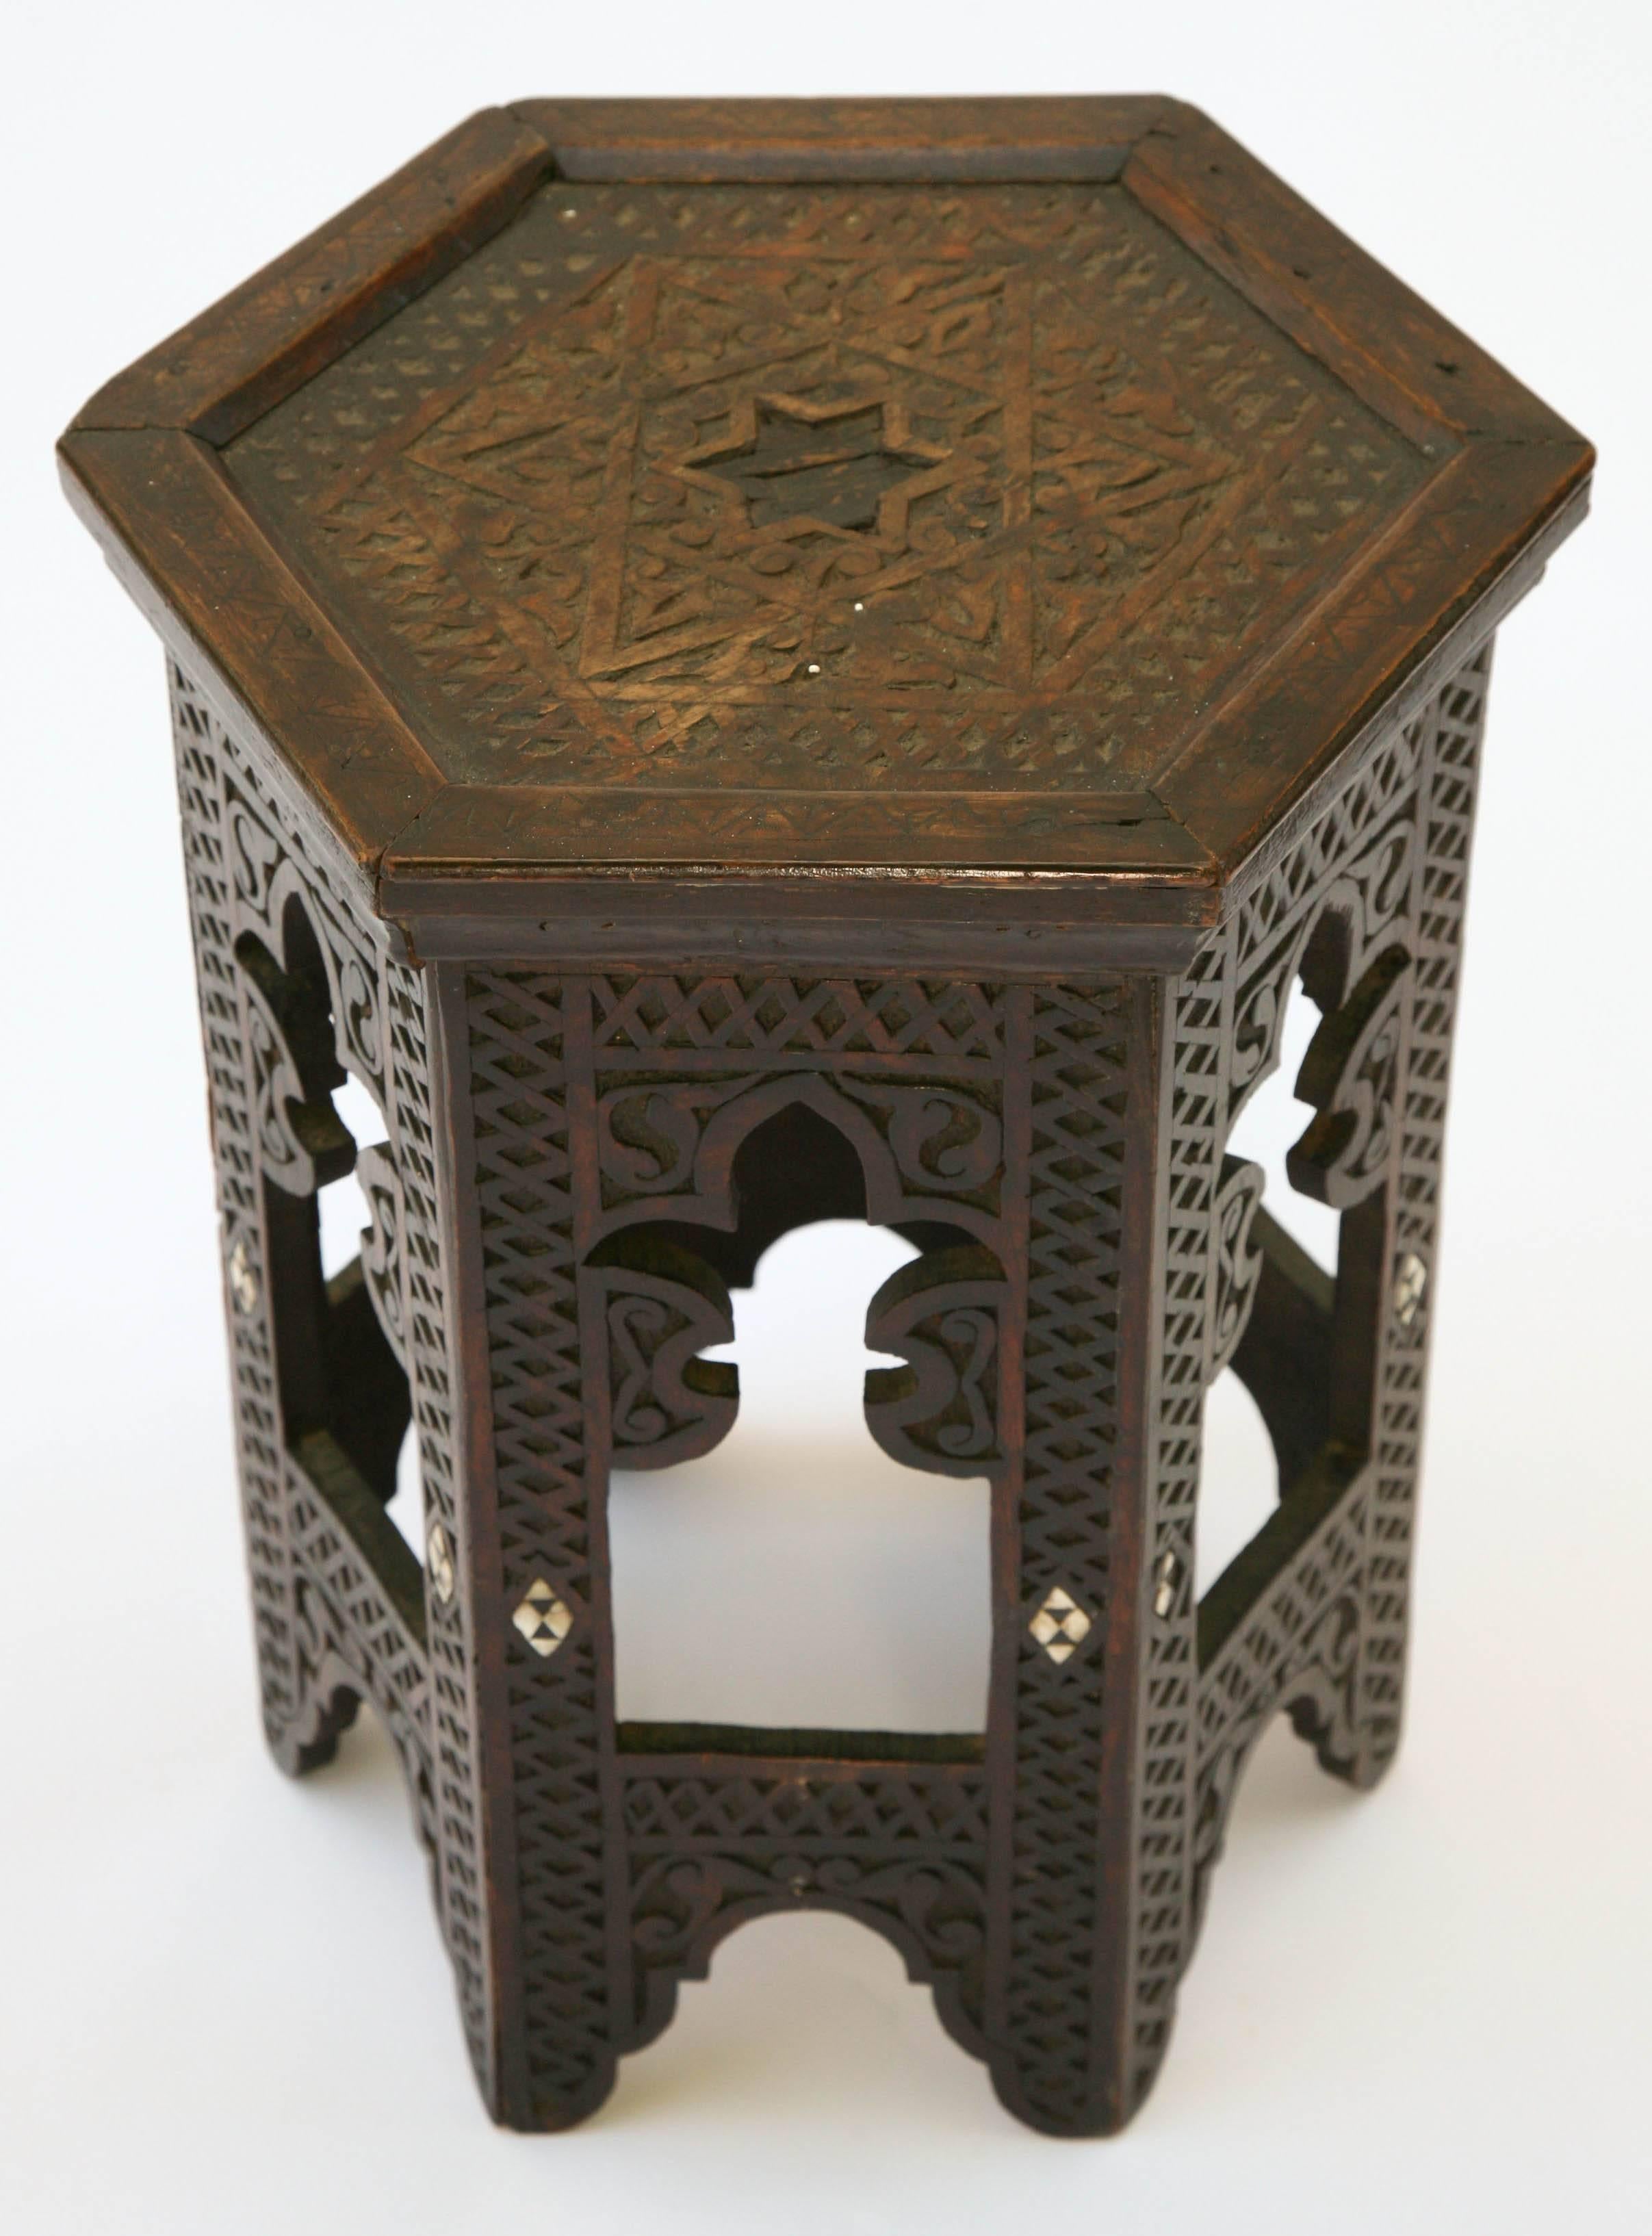 Accent table, of rosewood, having an octagonal top with star pattern decoration, on conforming base, with pieced legs, and elaborate in-carved crosshatching, bone inlay accents.

Stock ID: D9326